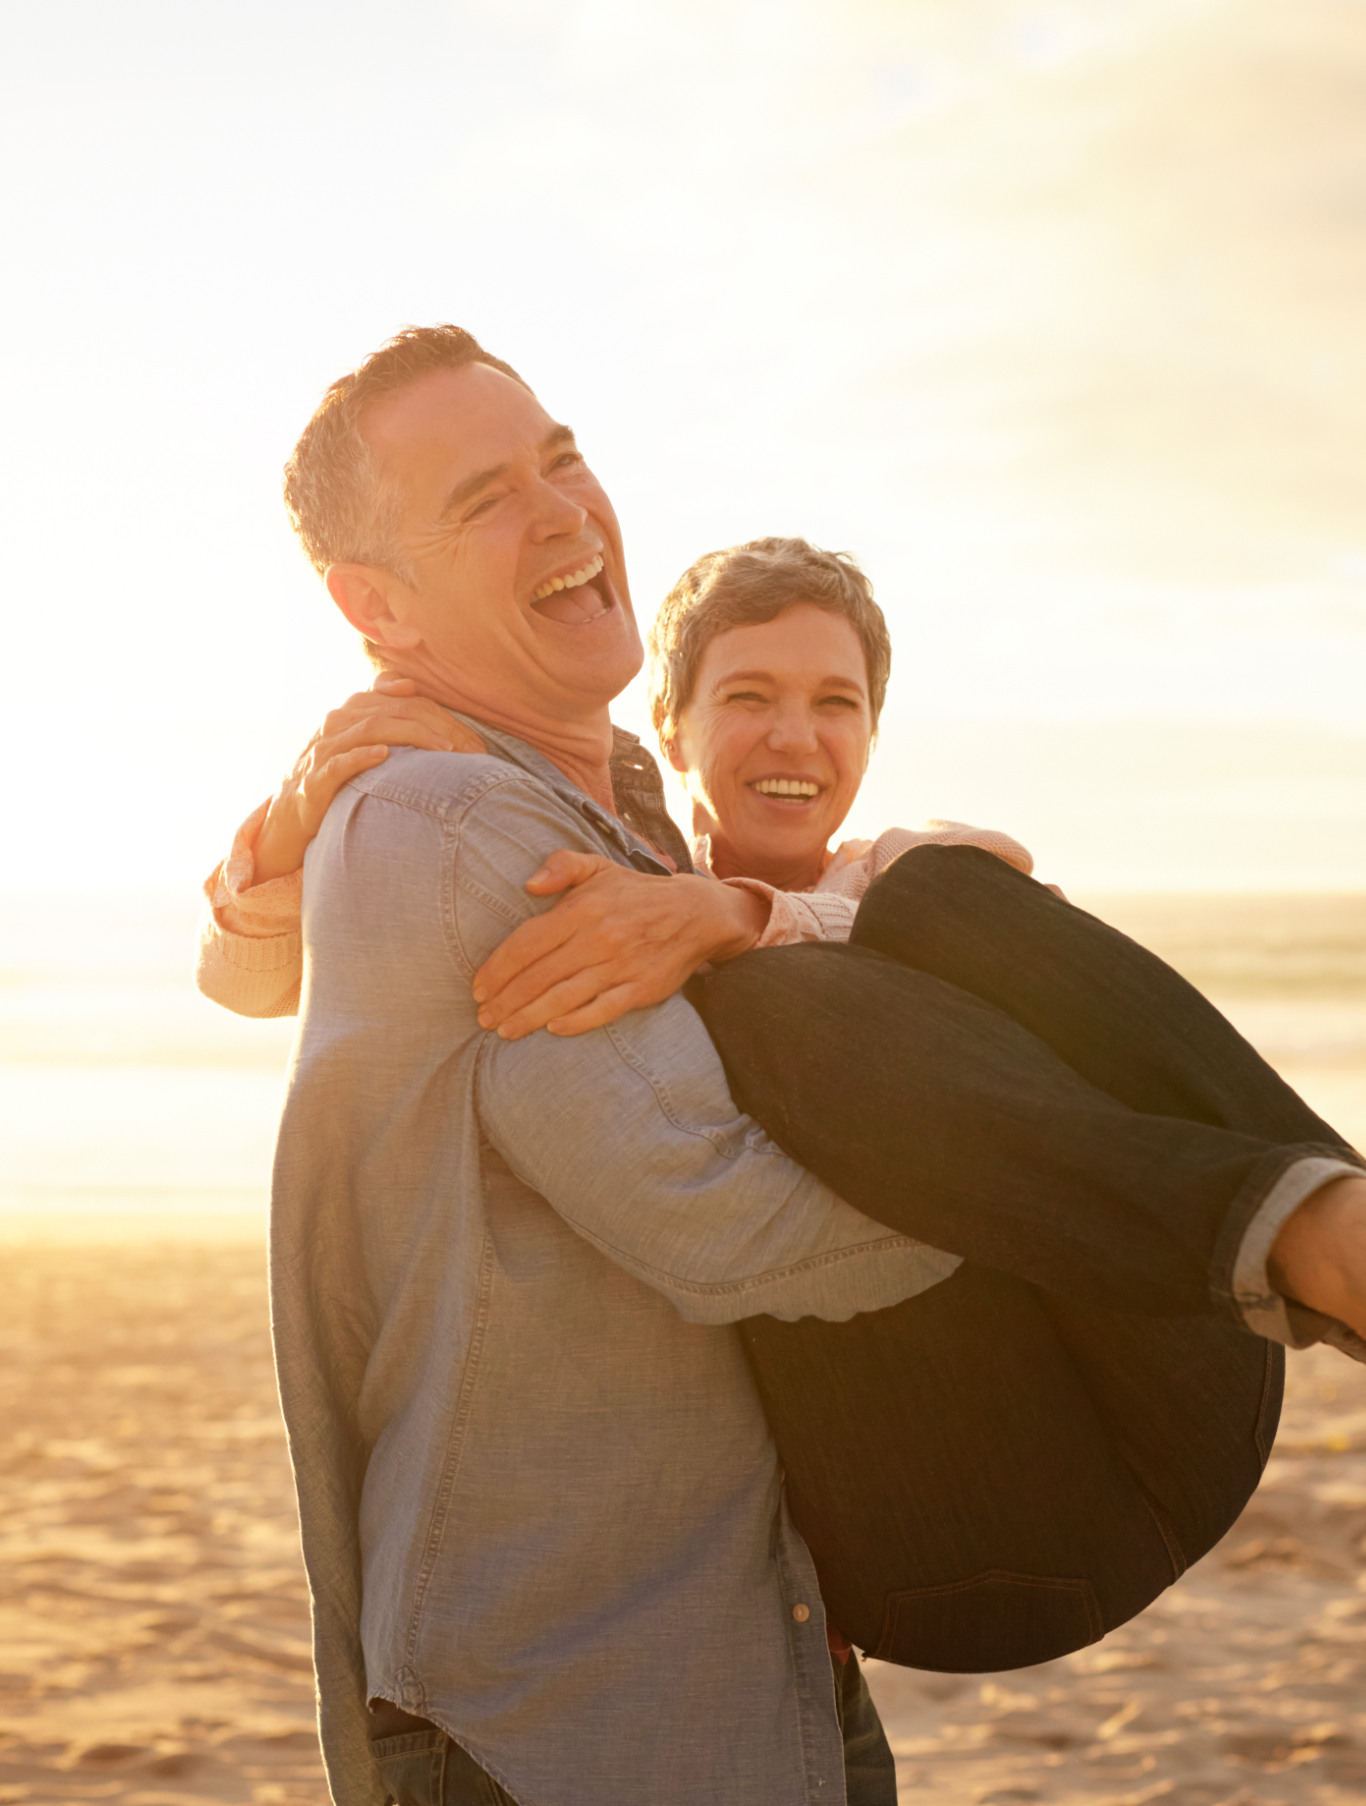 A laughing man carrying his smiling wife on the beach